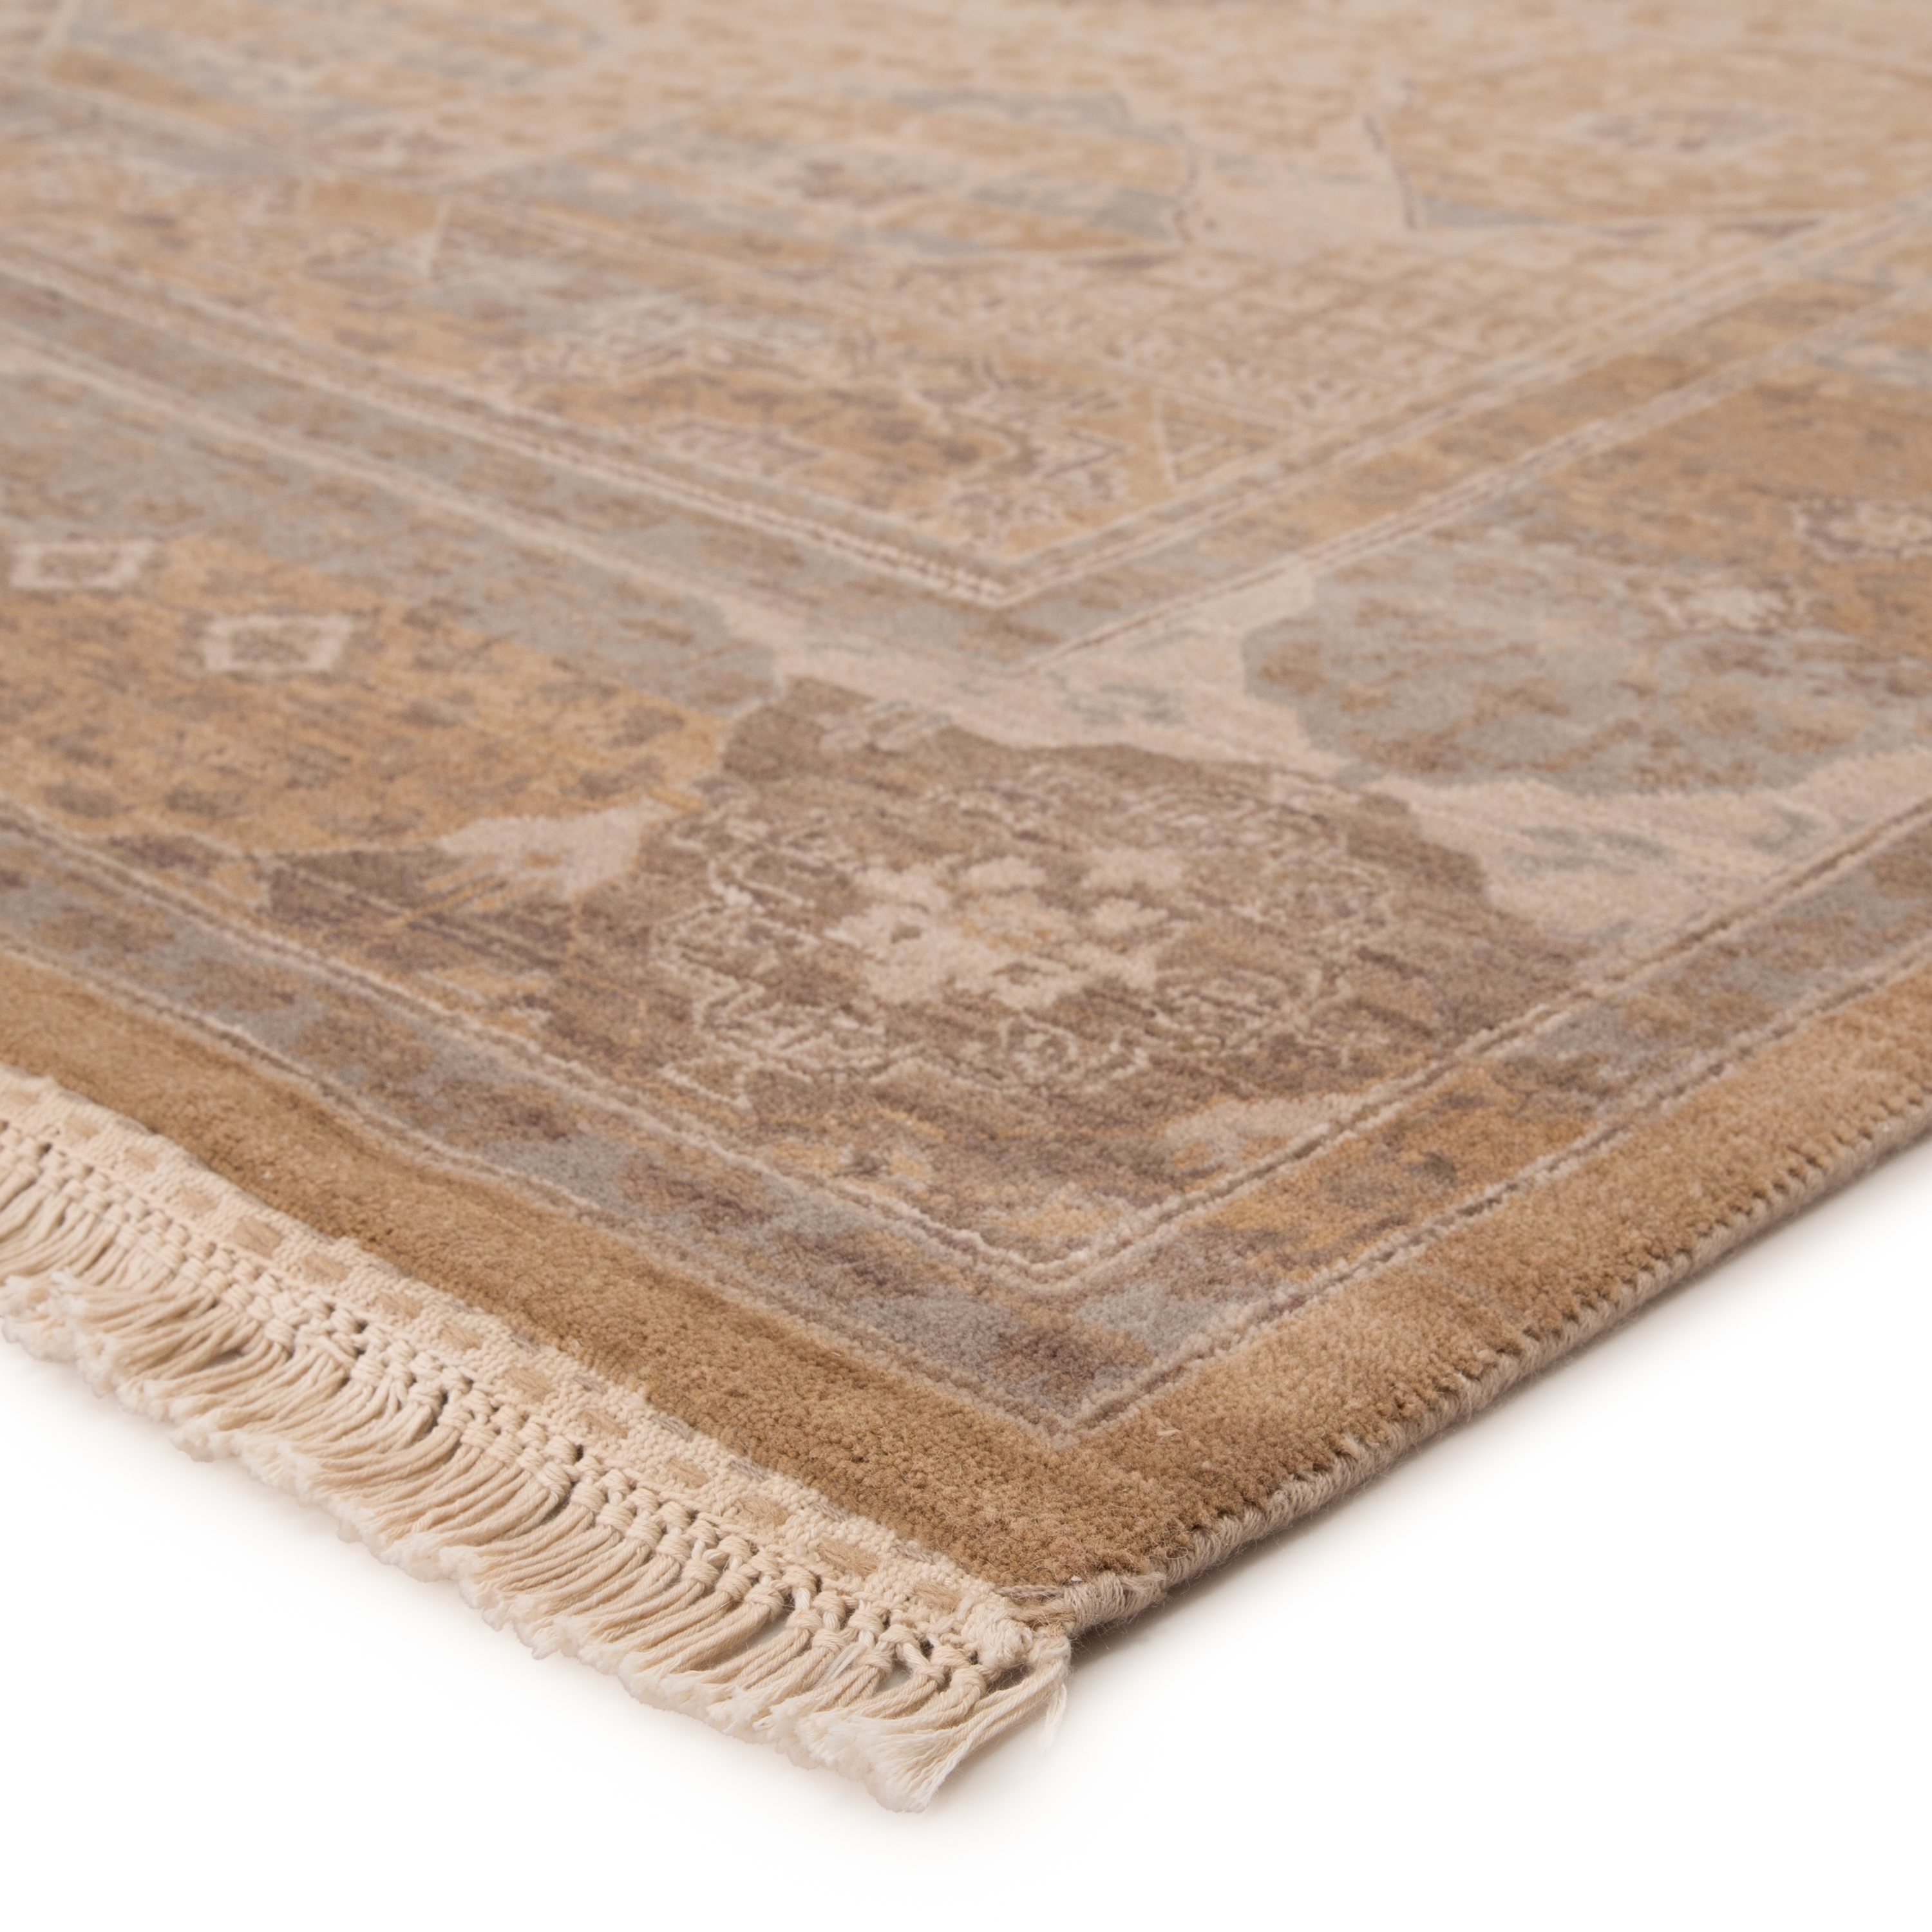 Jenny Jones by Levant Hand-Knotted Medallion Beige/ Light Gray Area Rug (8'X10') - Image 1